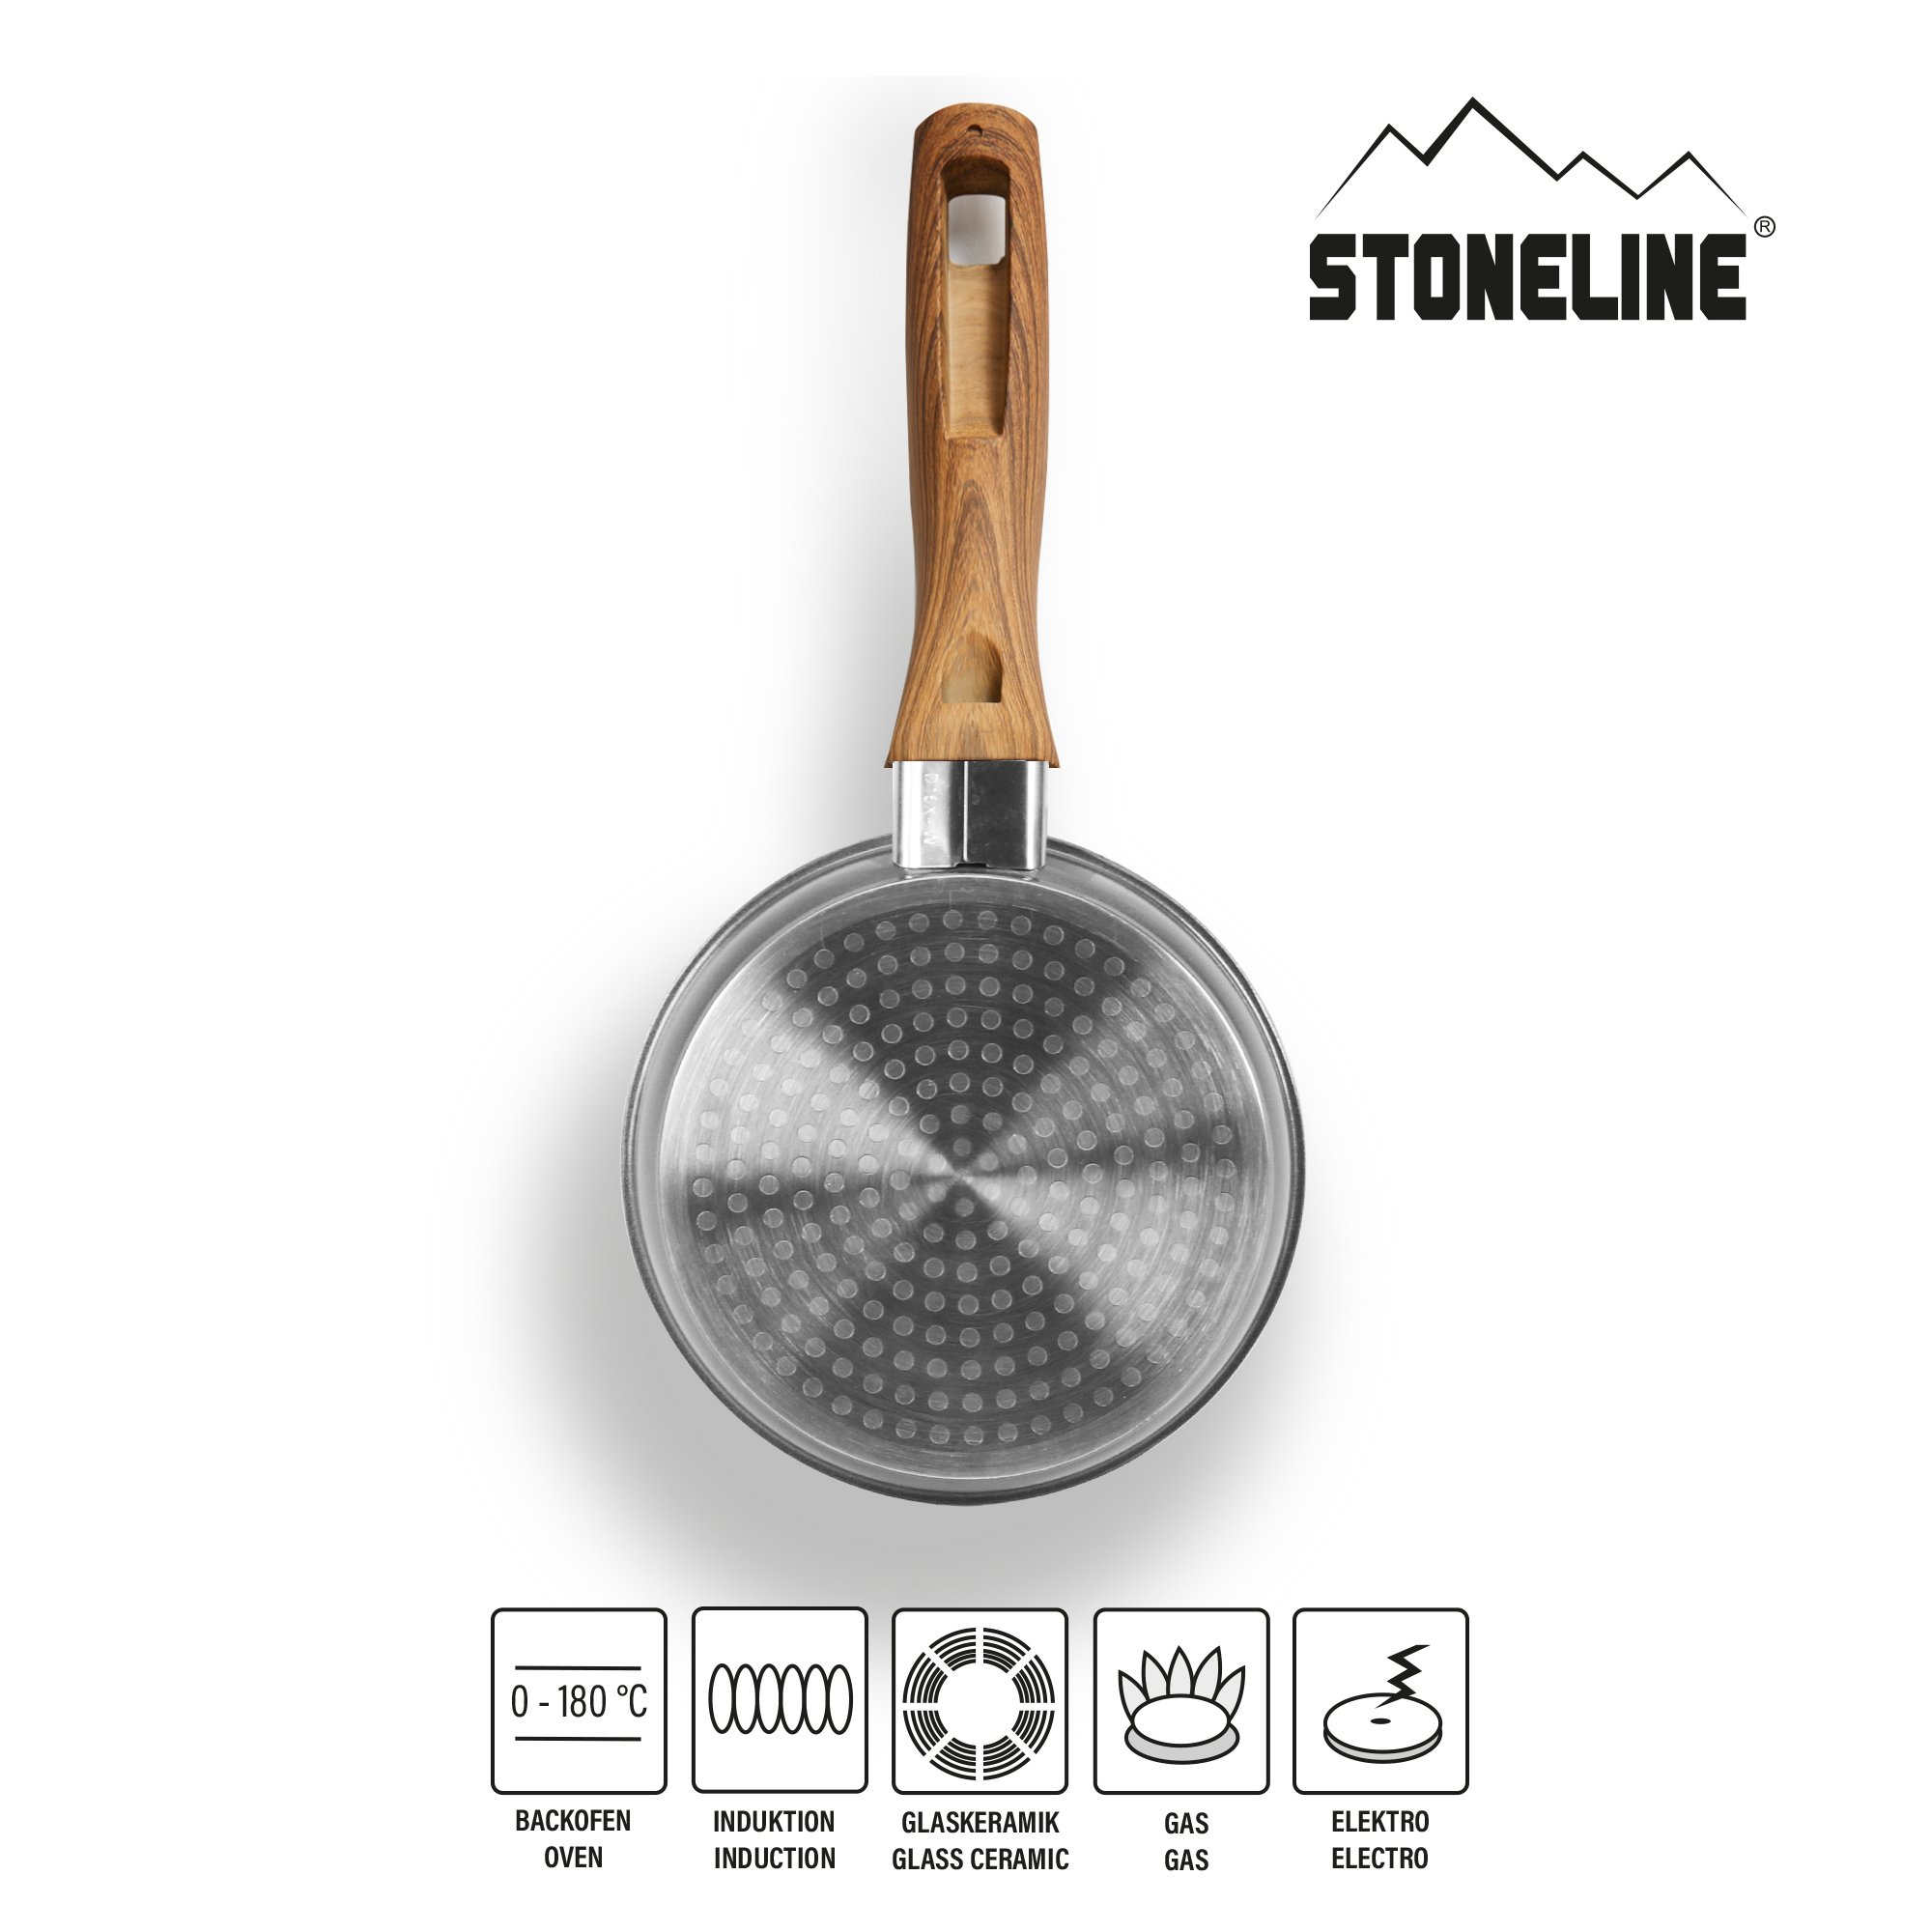 STONELINE® Frying Pan 14 cm, Non-Stick Pan, Wood Design | Back to Nature